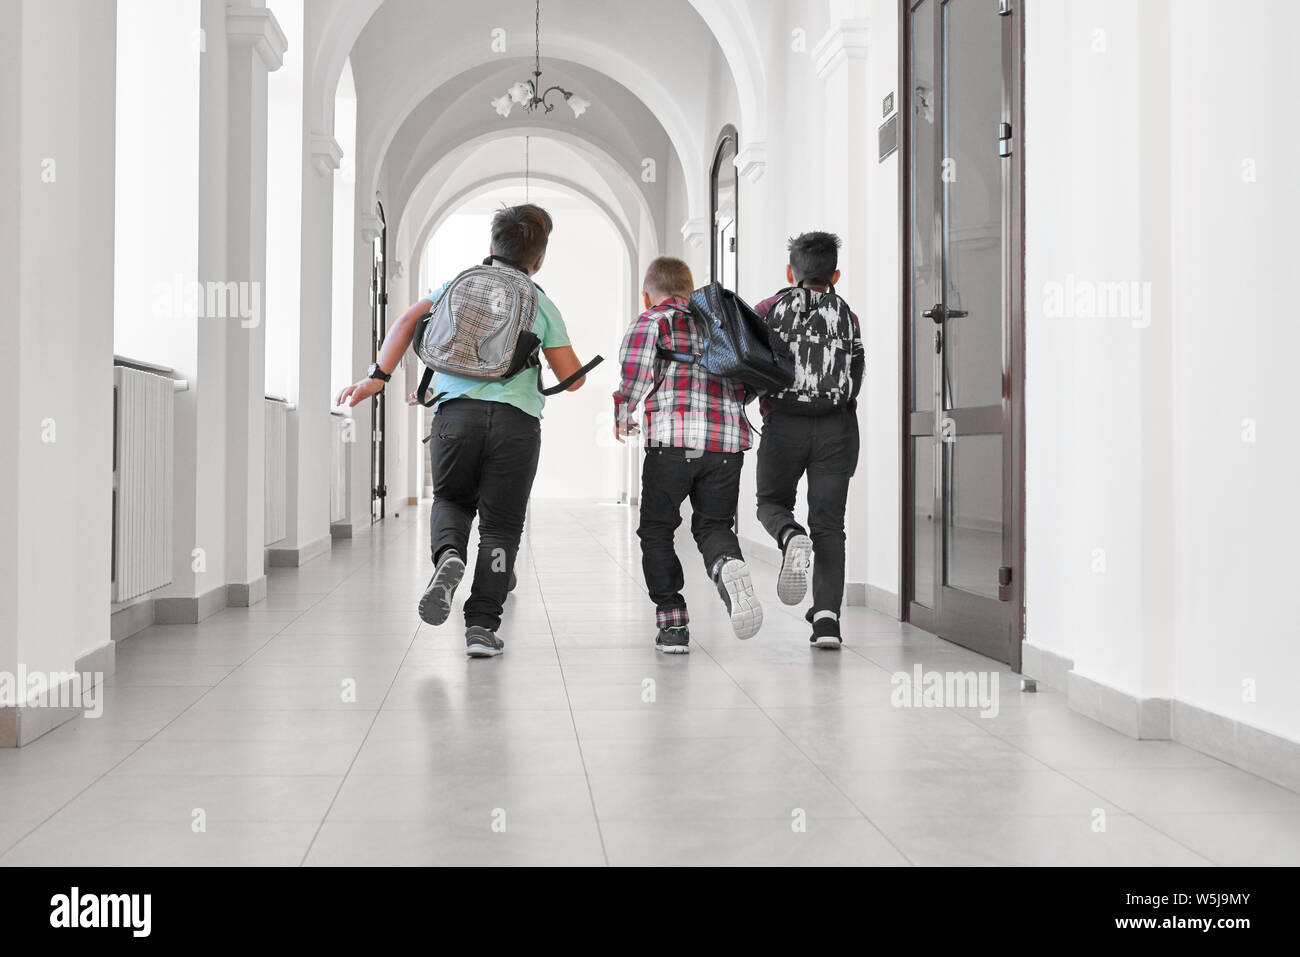 Group of schoolboys with school backpacks running in hallway of school. Classmates having fun and running in break between lessons or after lessons. Stock Photo